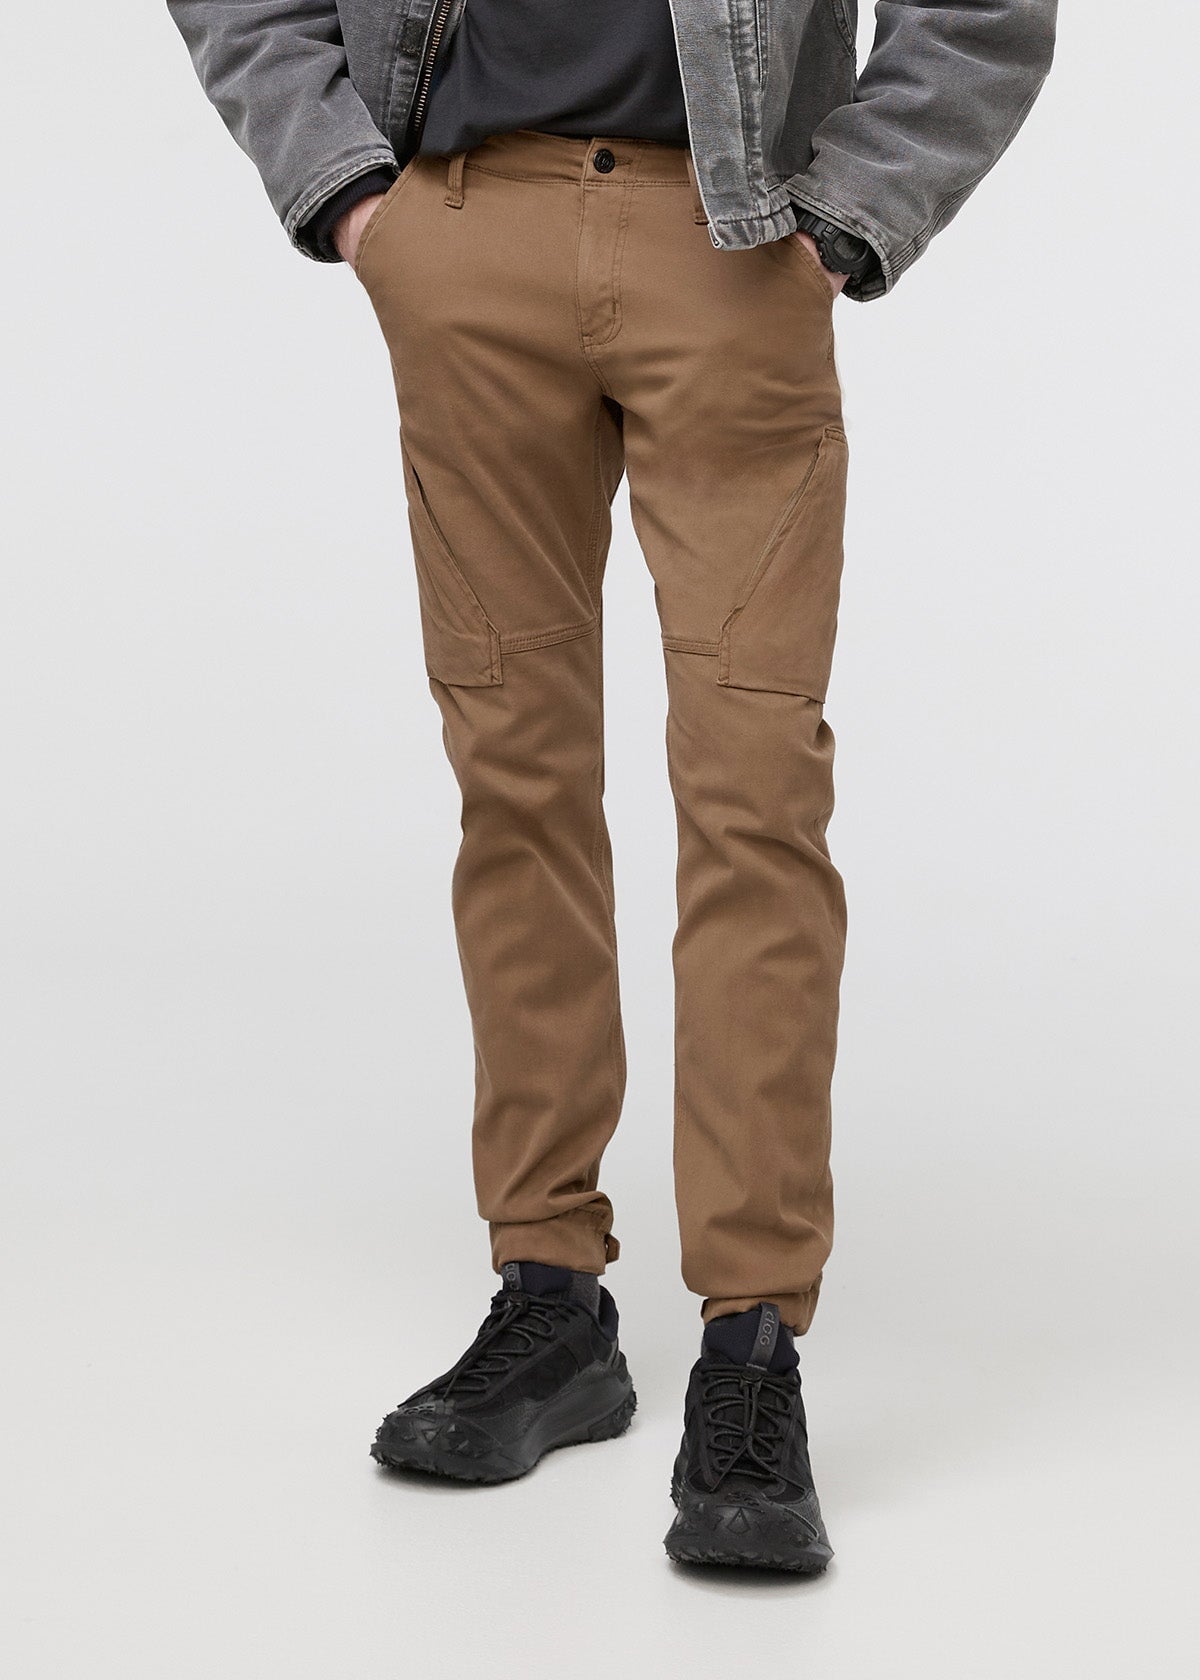 Relaxed Fit Single Knee Pants Hamilton Brown, Carhartt WIP